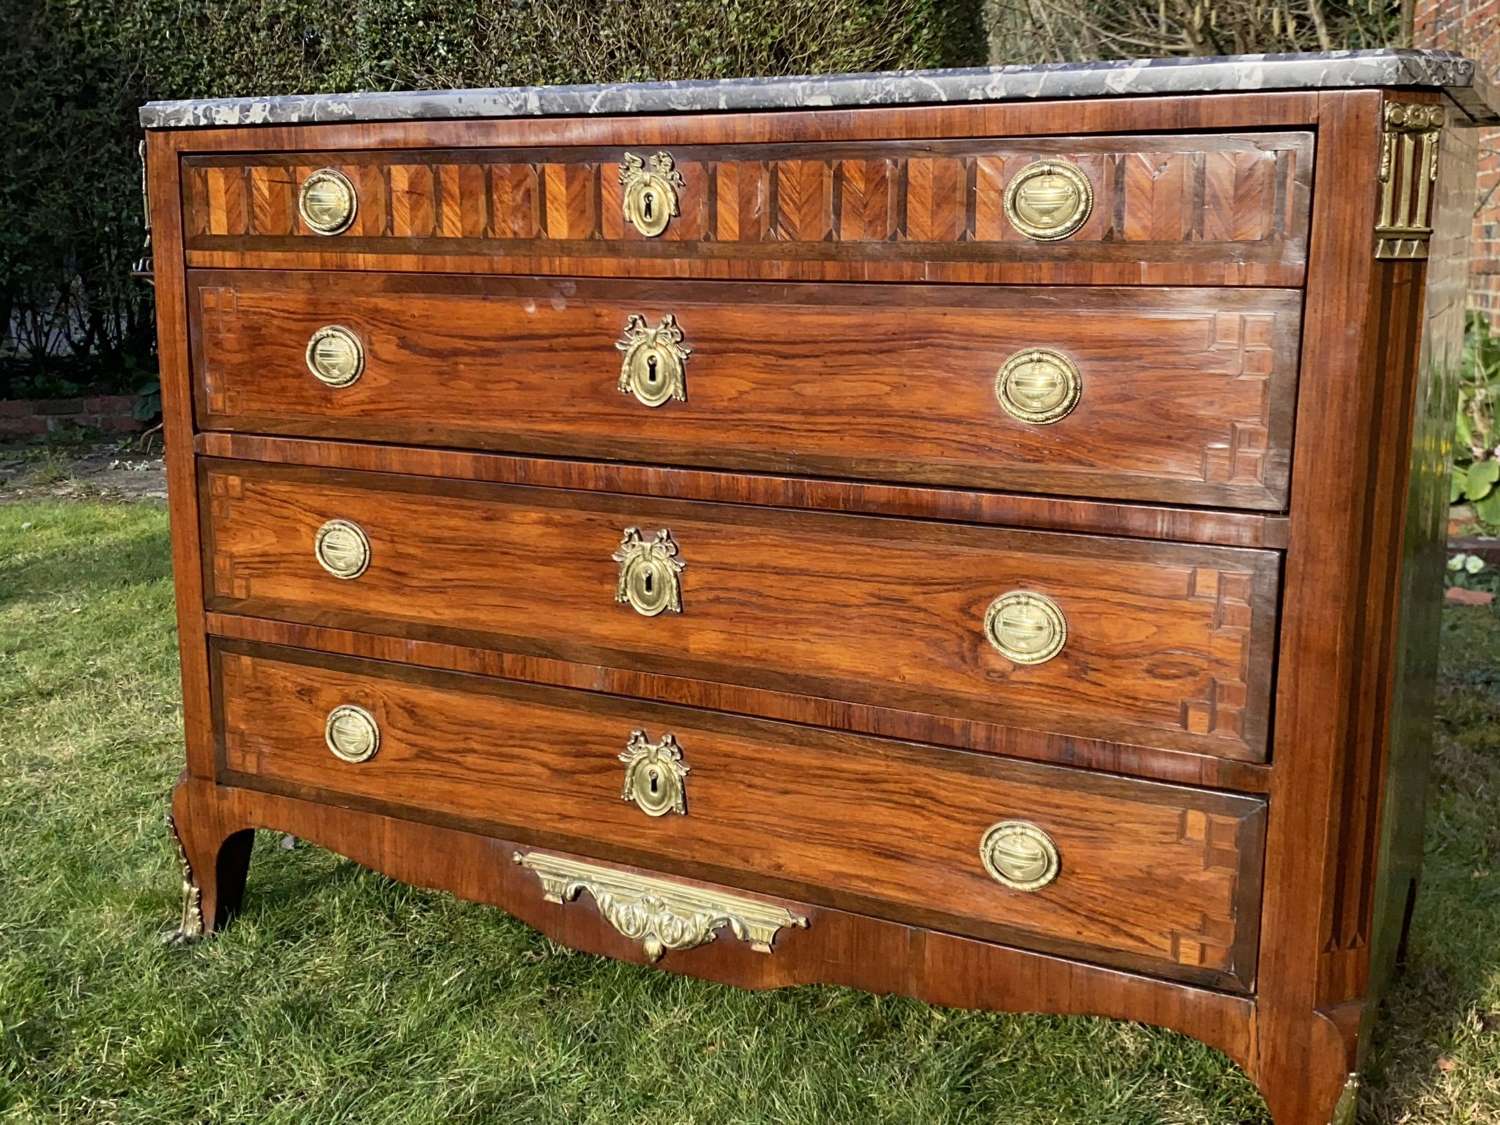 18th Century Transitional Commode